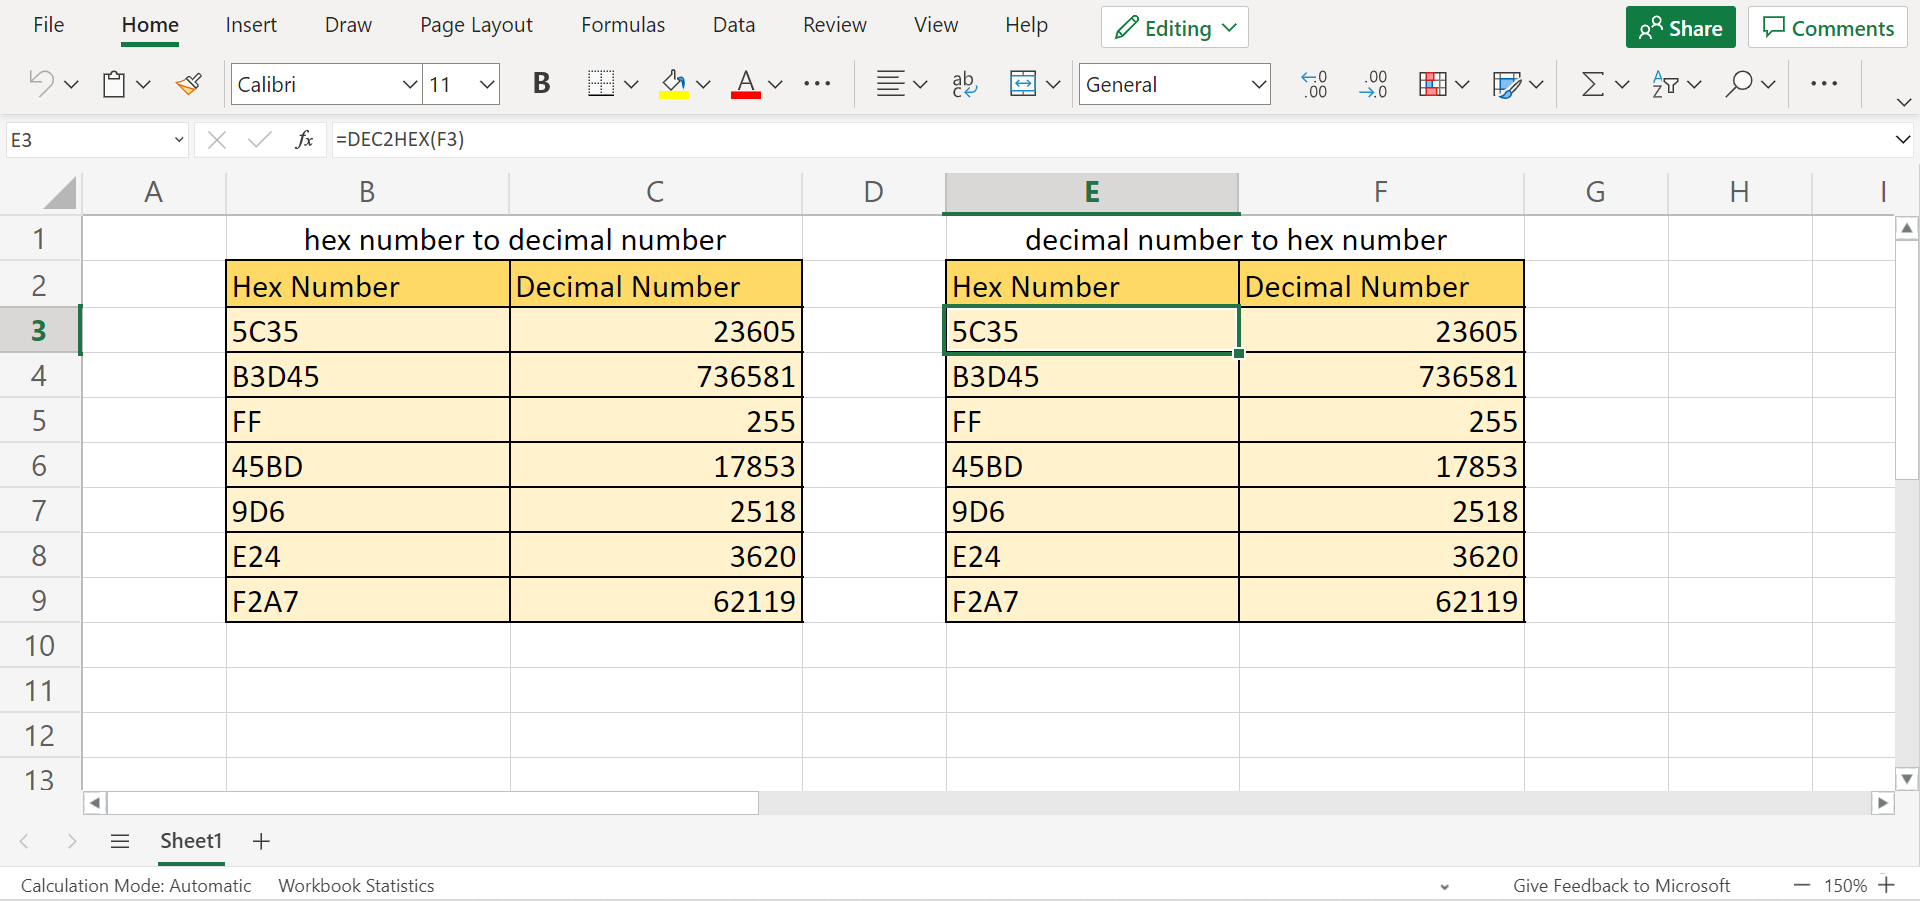 Final output after converting decimal to hex number